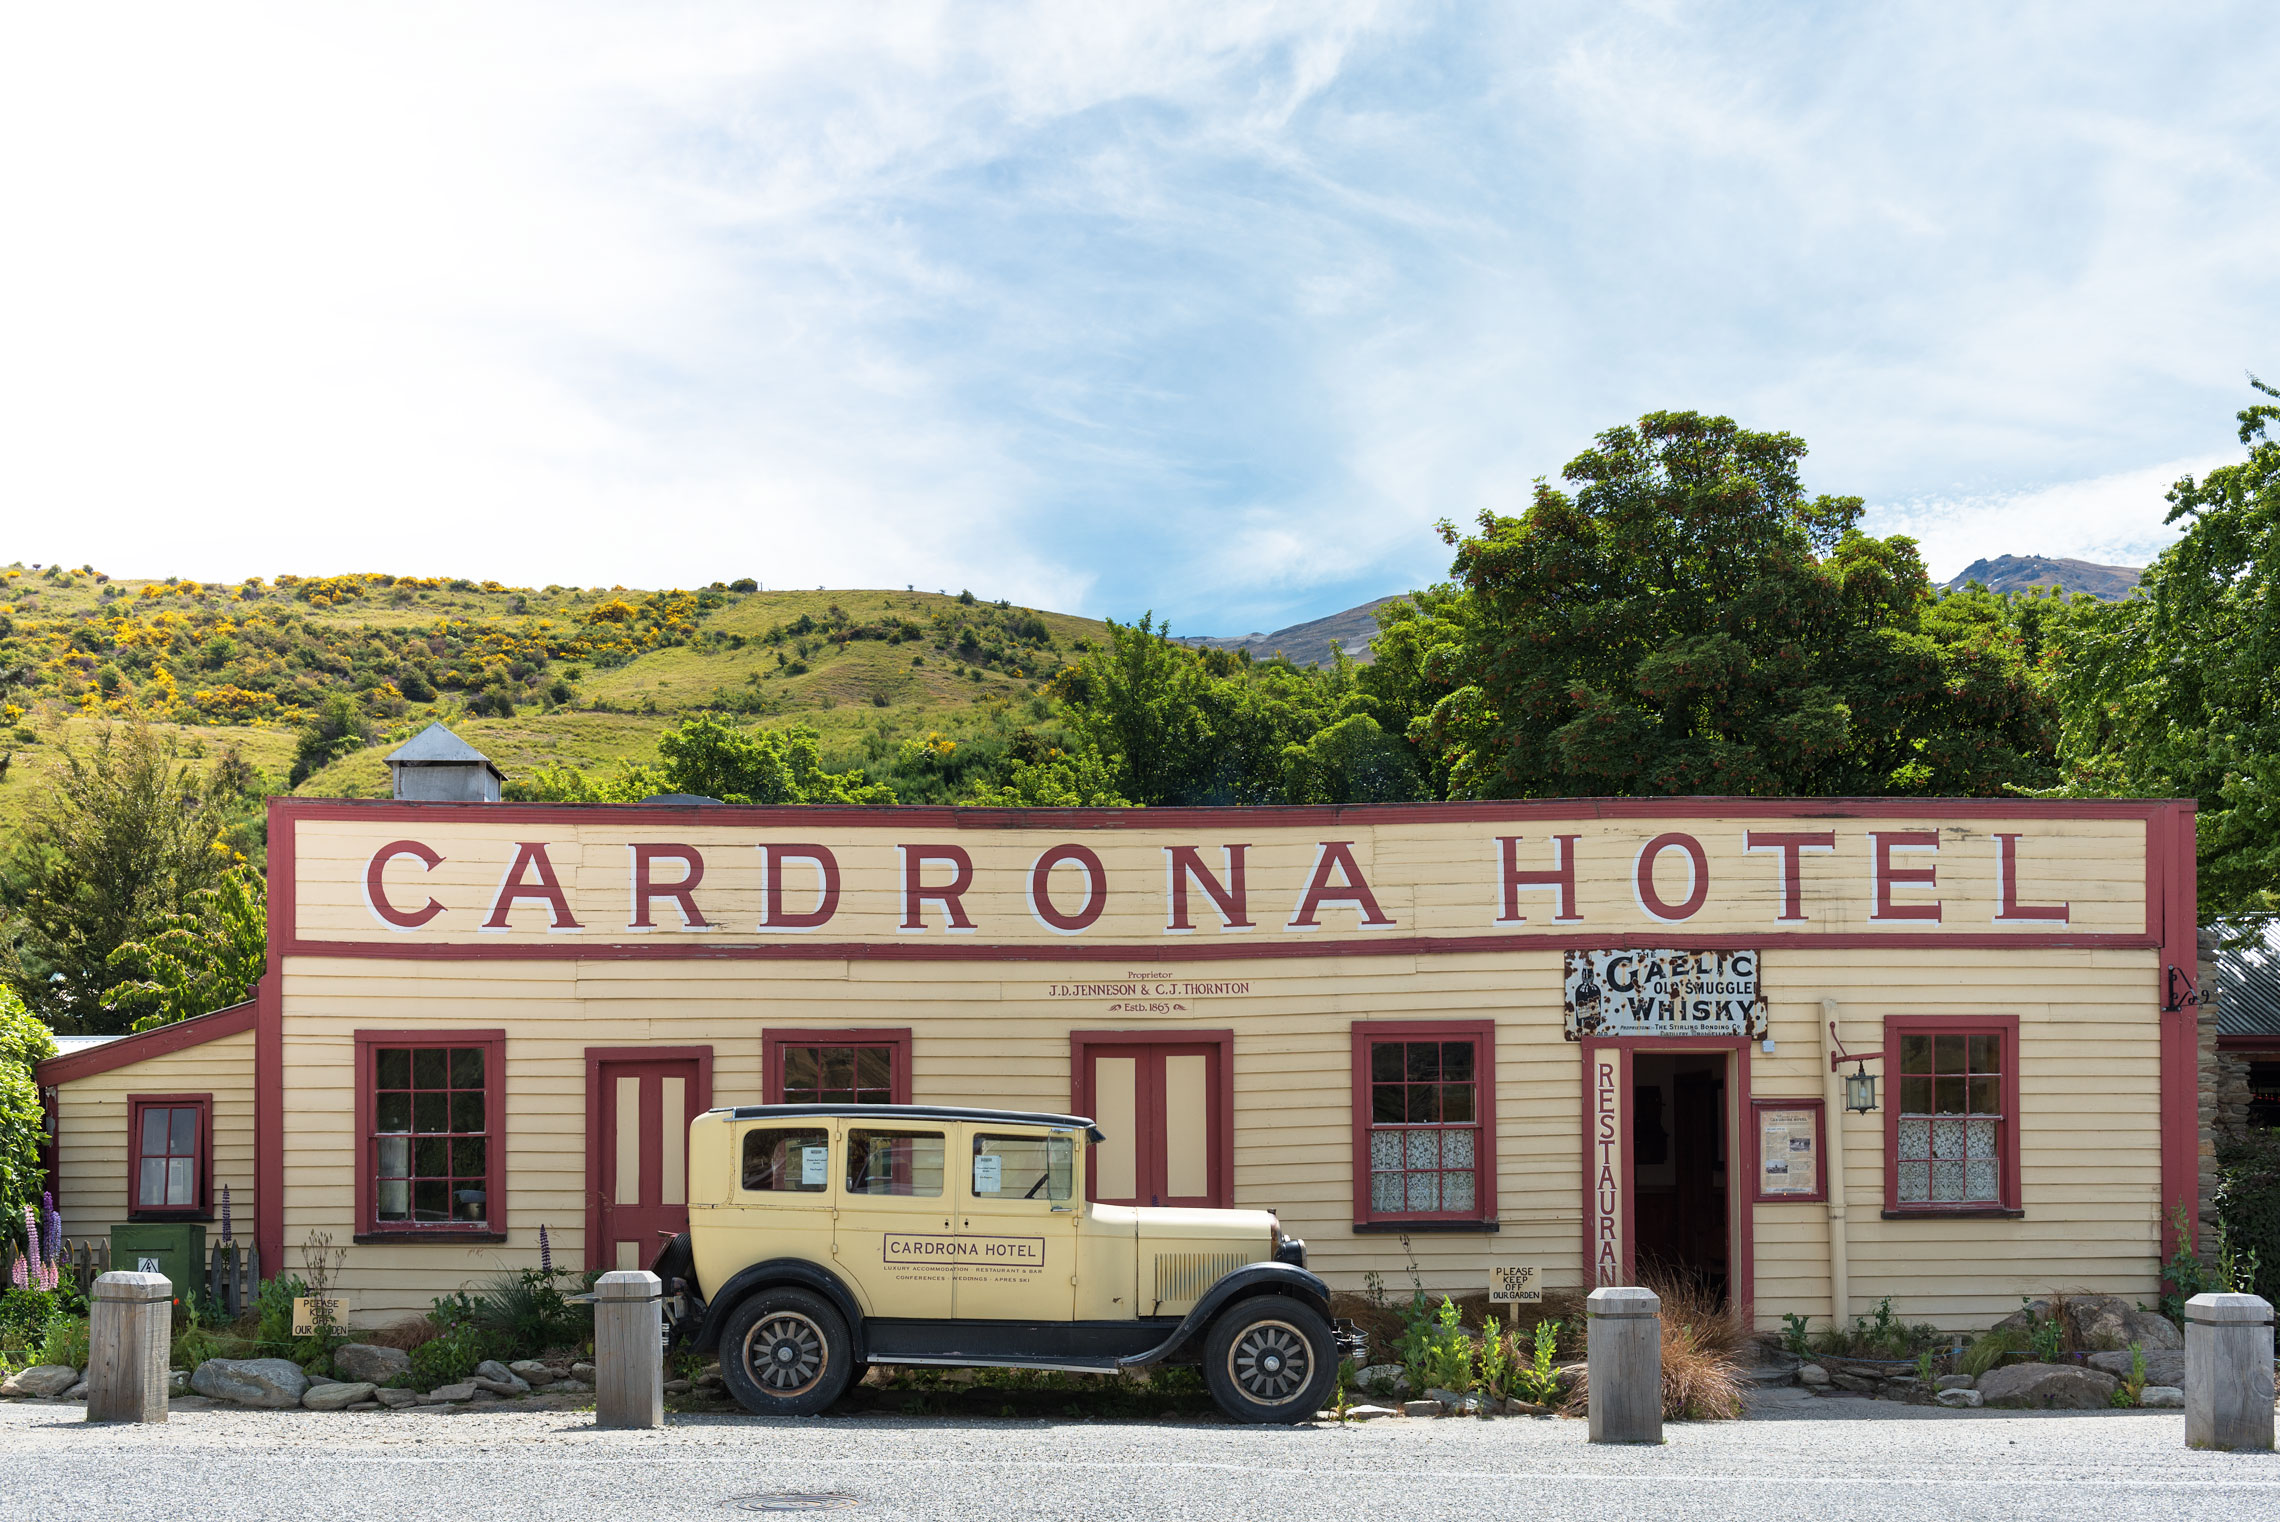 Road Trip in New Zealand, Milford Sound, Cardrona Hotel